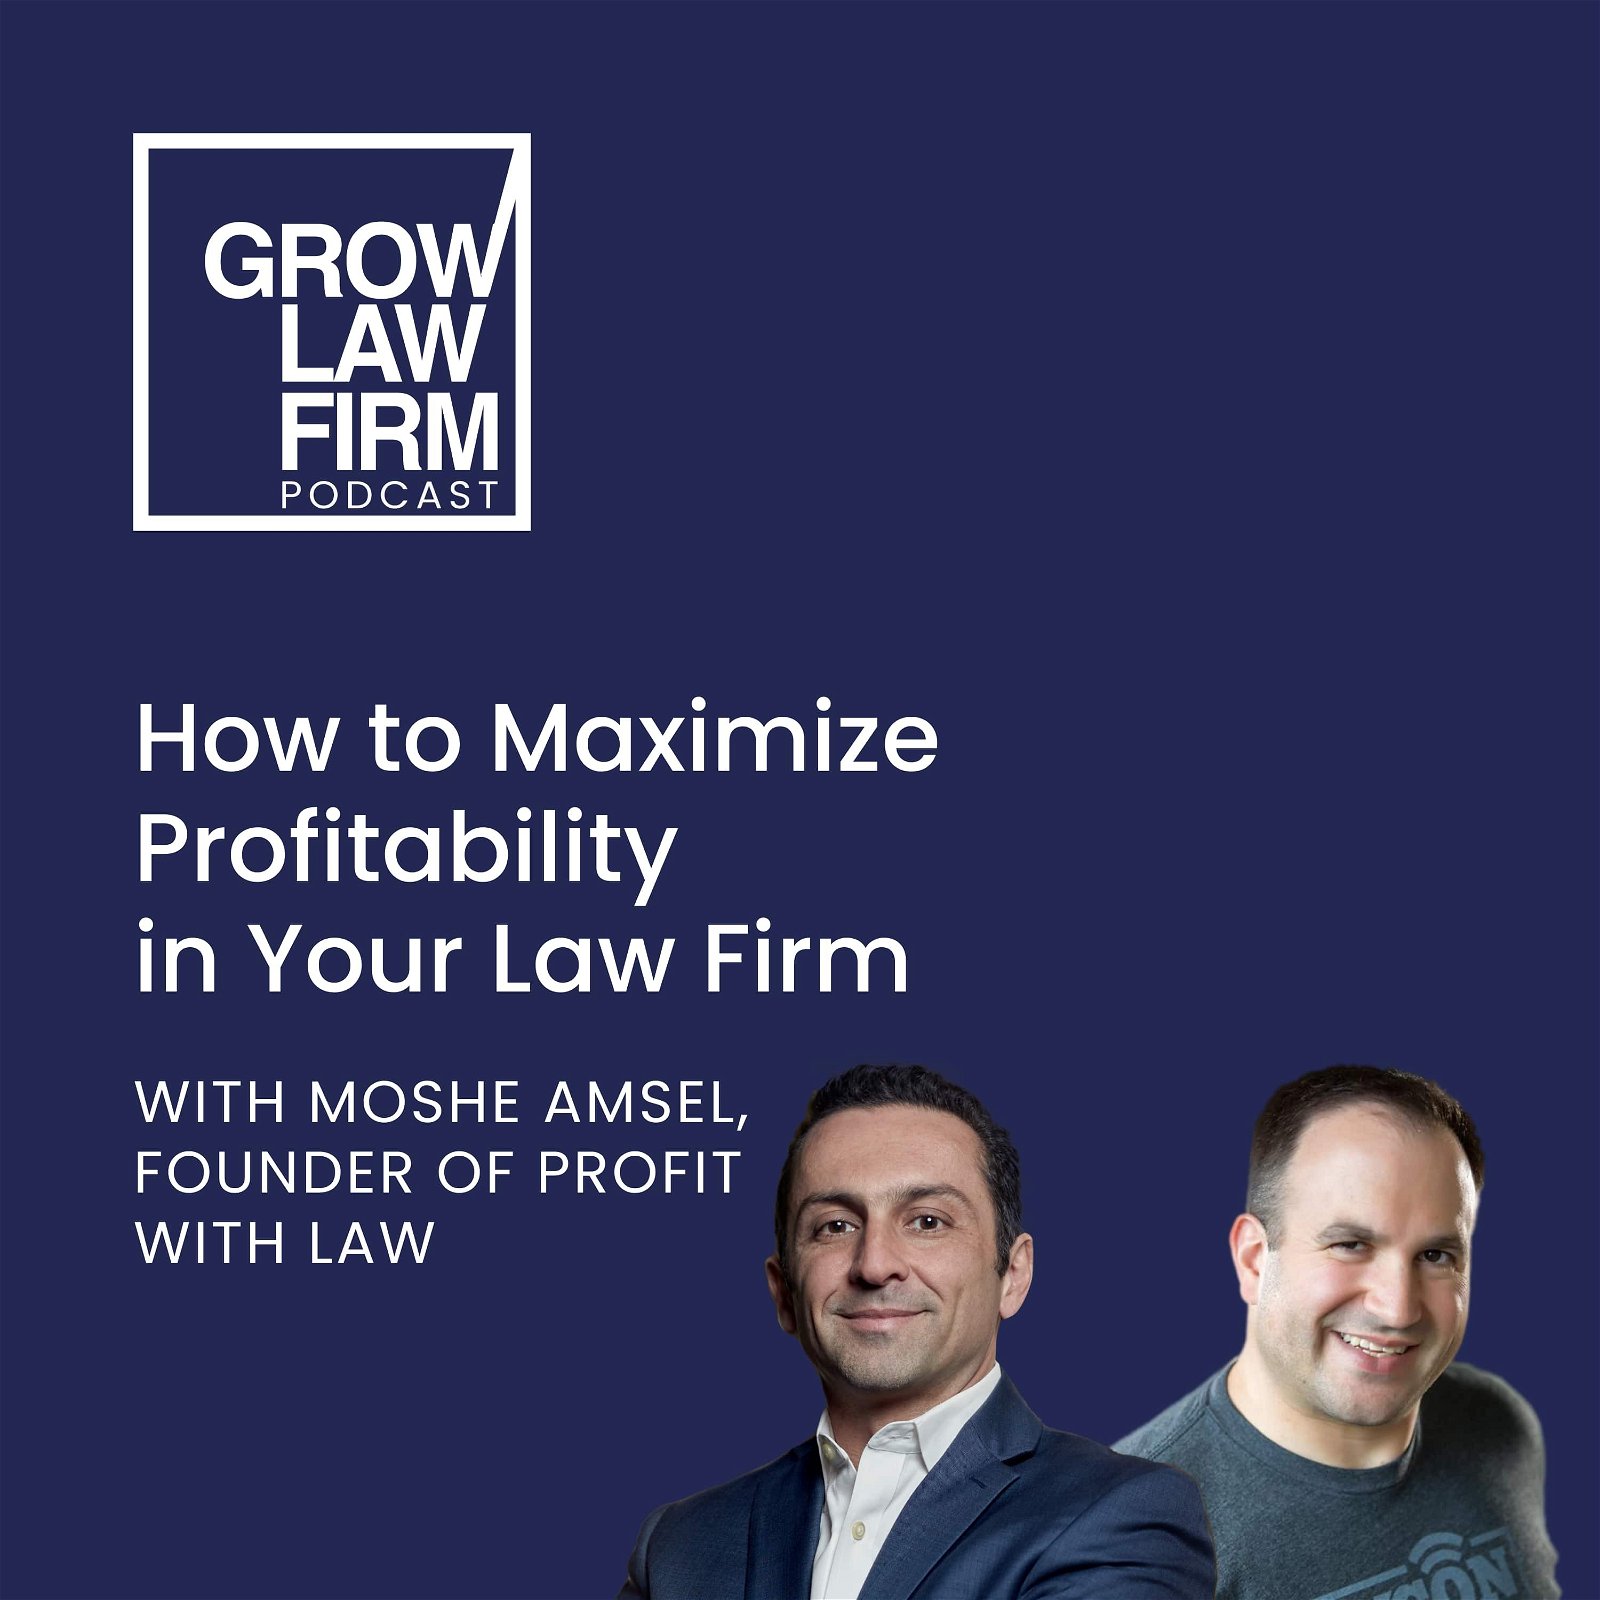 How to Gain the Most Profitability from Your Law Firm with Moshe Amsel, Founder of Profit with Law